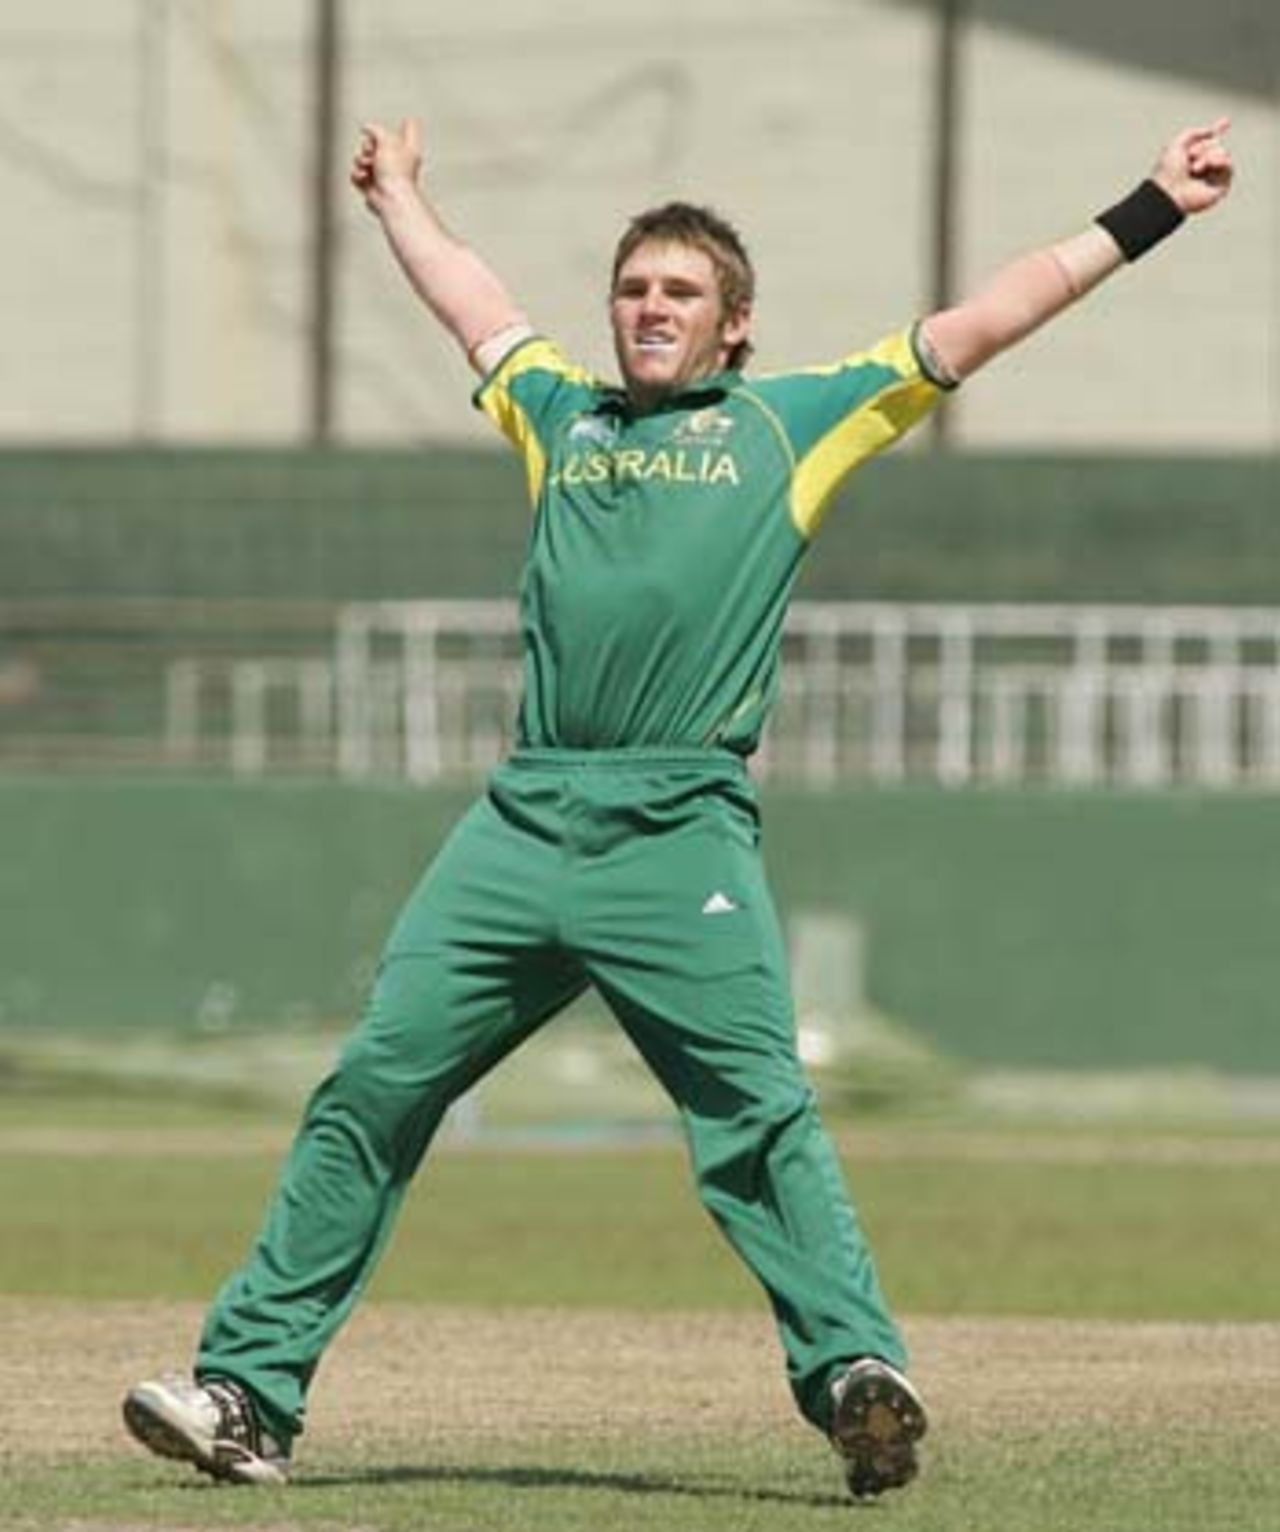 Simon Keen of Australia celebrates a wicket during his side's victory over Sri Lanka at the SSC in the Super League quarter-final of the ICC
U/19 Cricket World Cup on Saturday